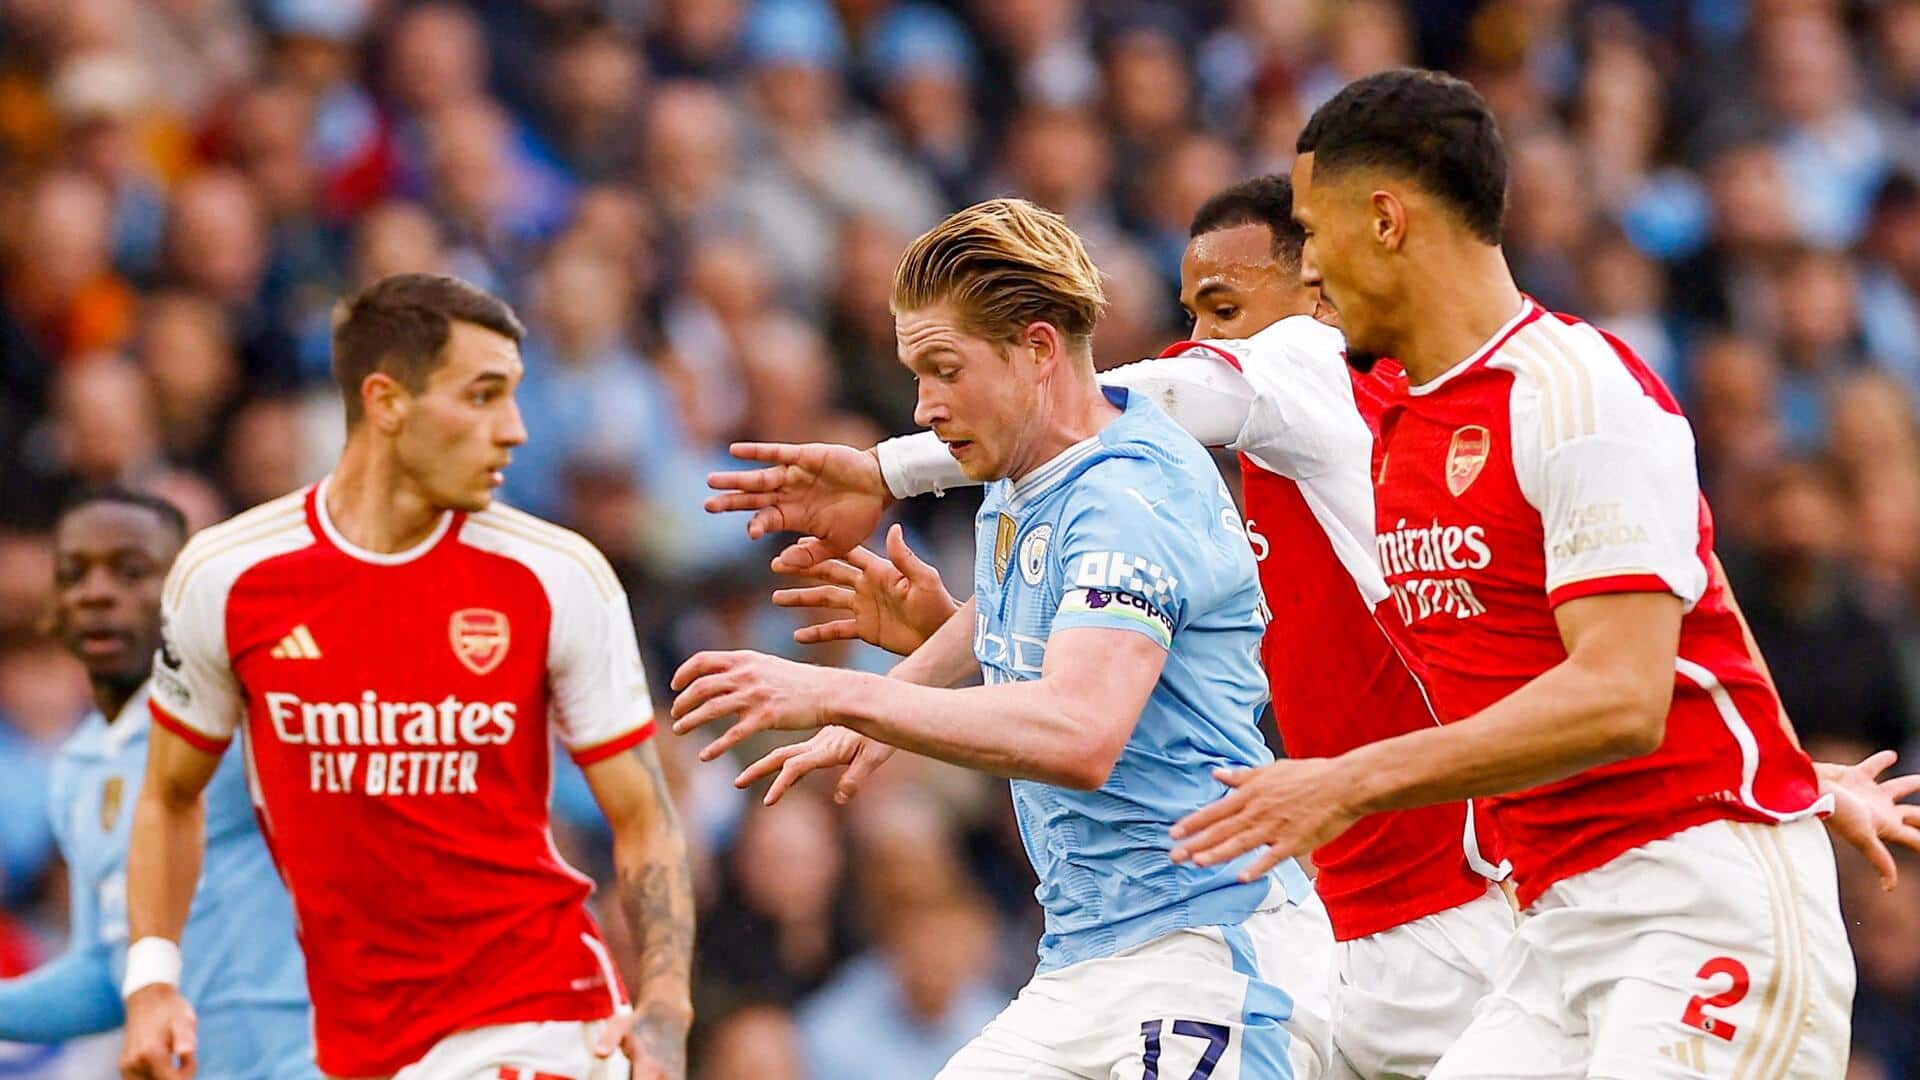 Premier League: Manchester City and Arsenal play out goalless draw